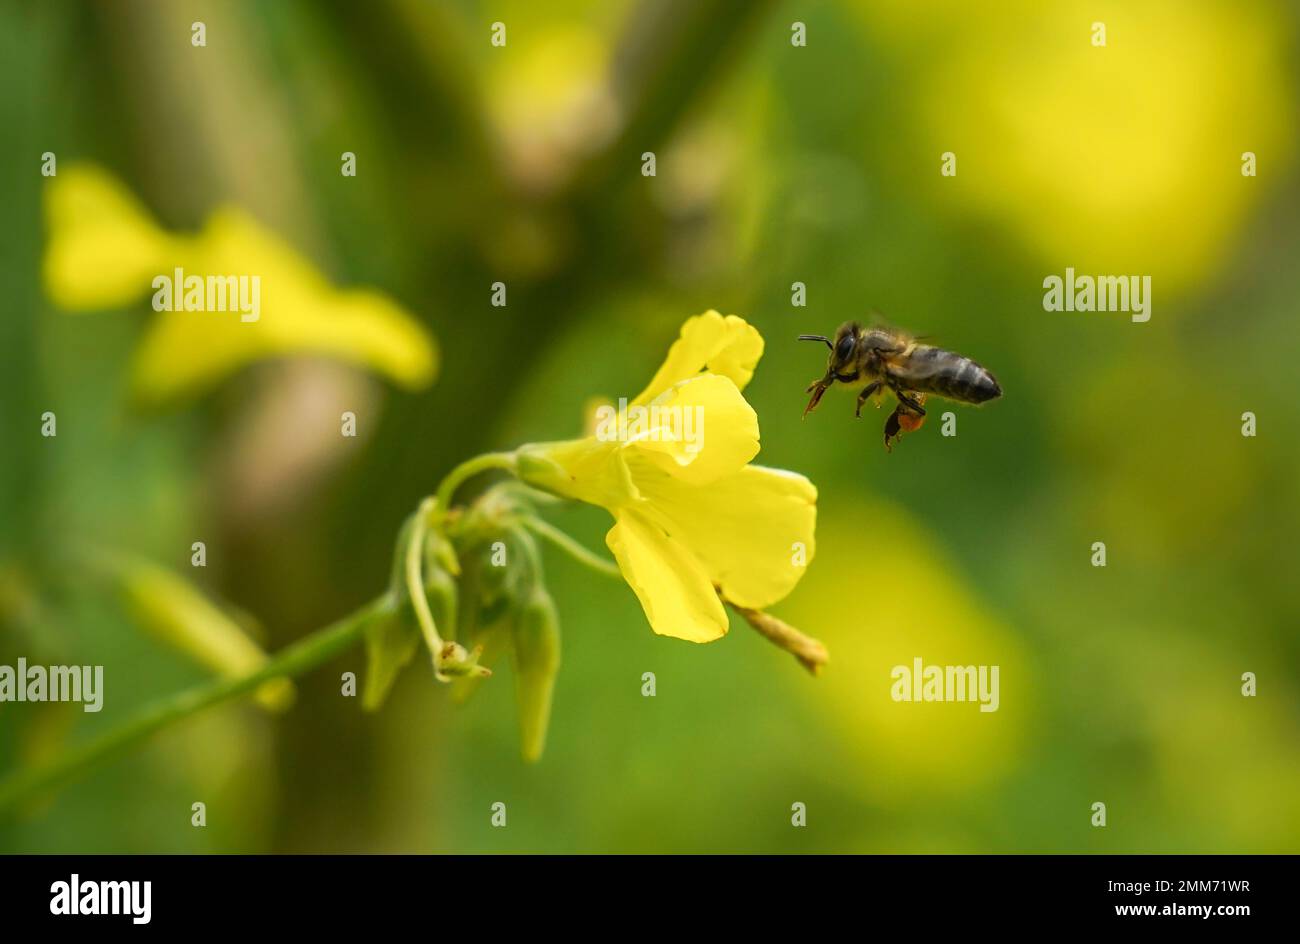 Honey bee with pollen on a Oxalis pes-caprae, Bermuda buttercup flower, Spain. Stock Photo